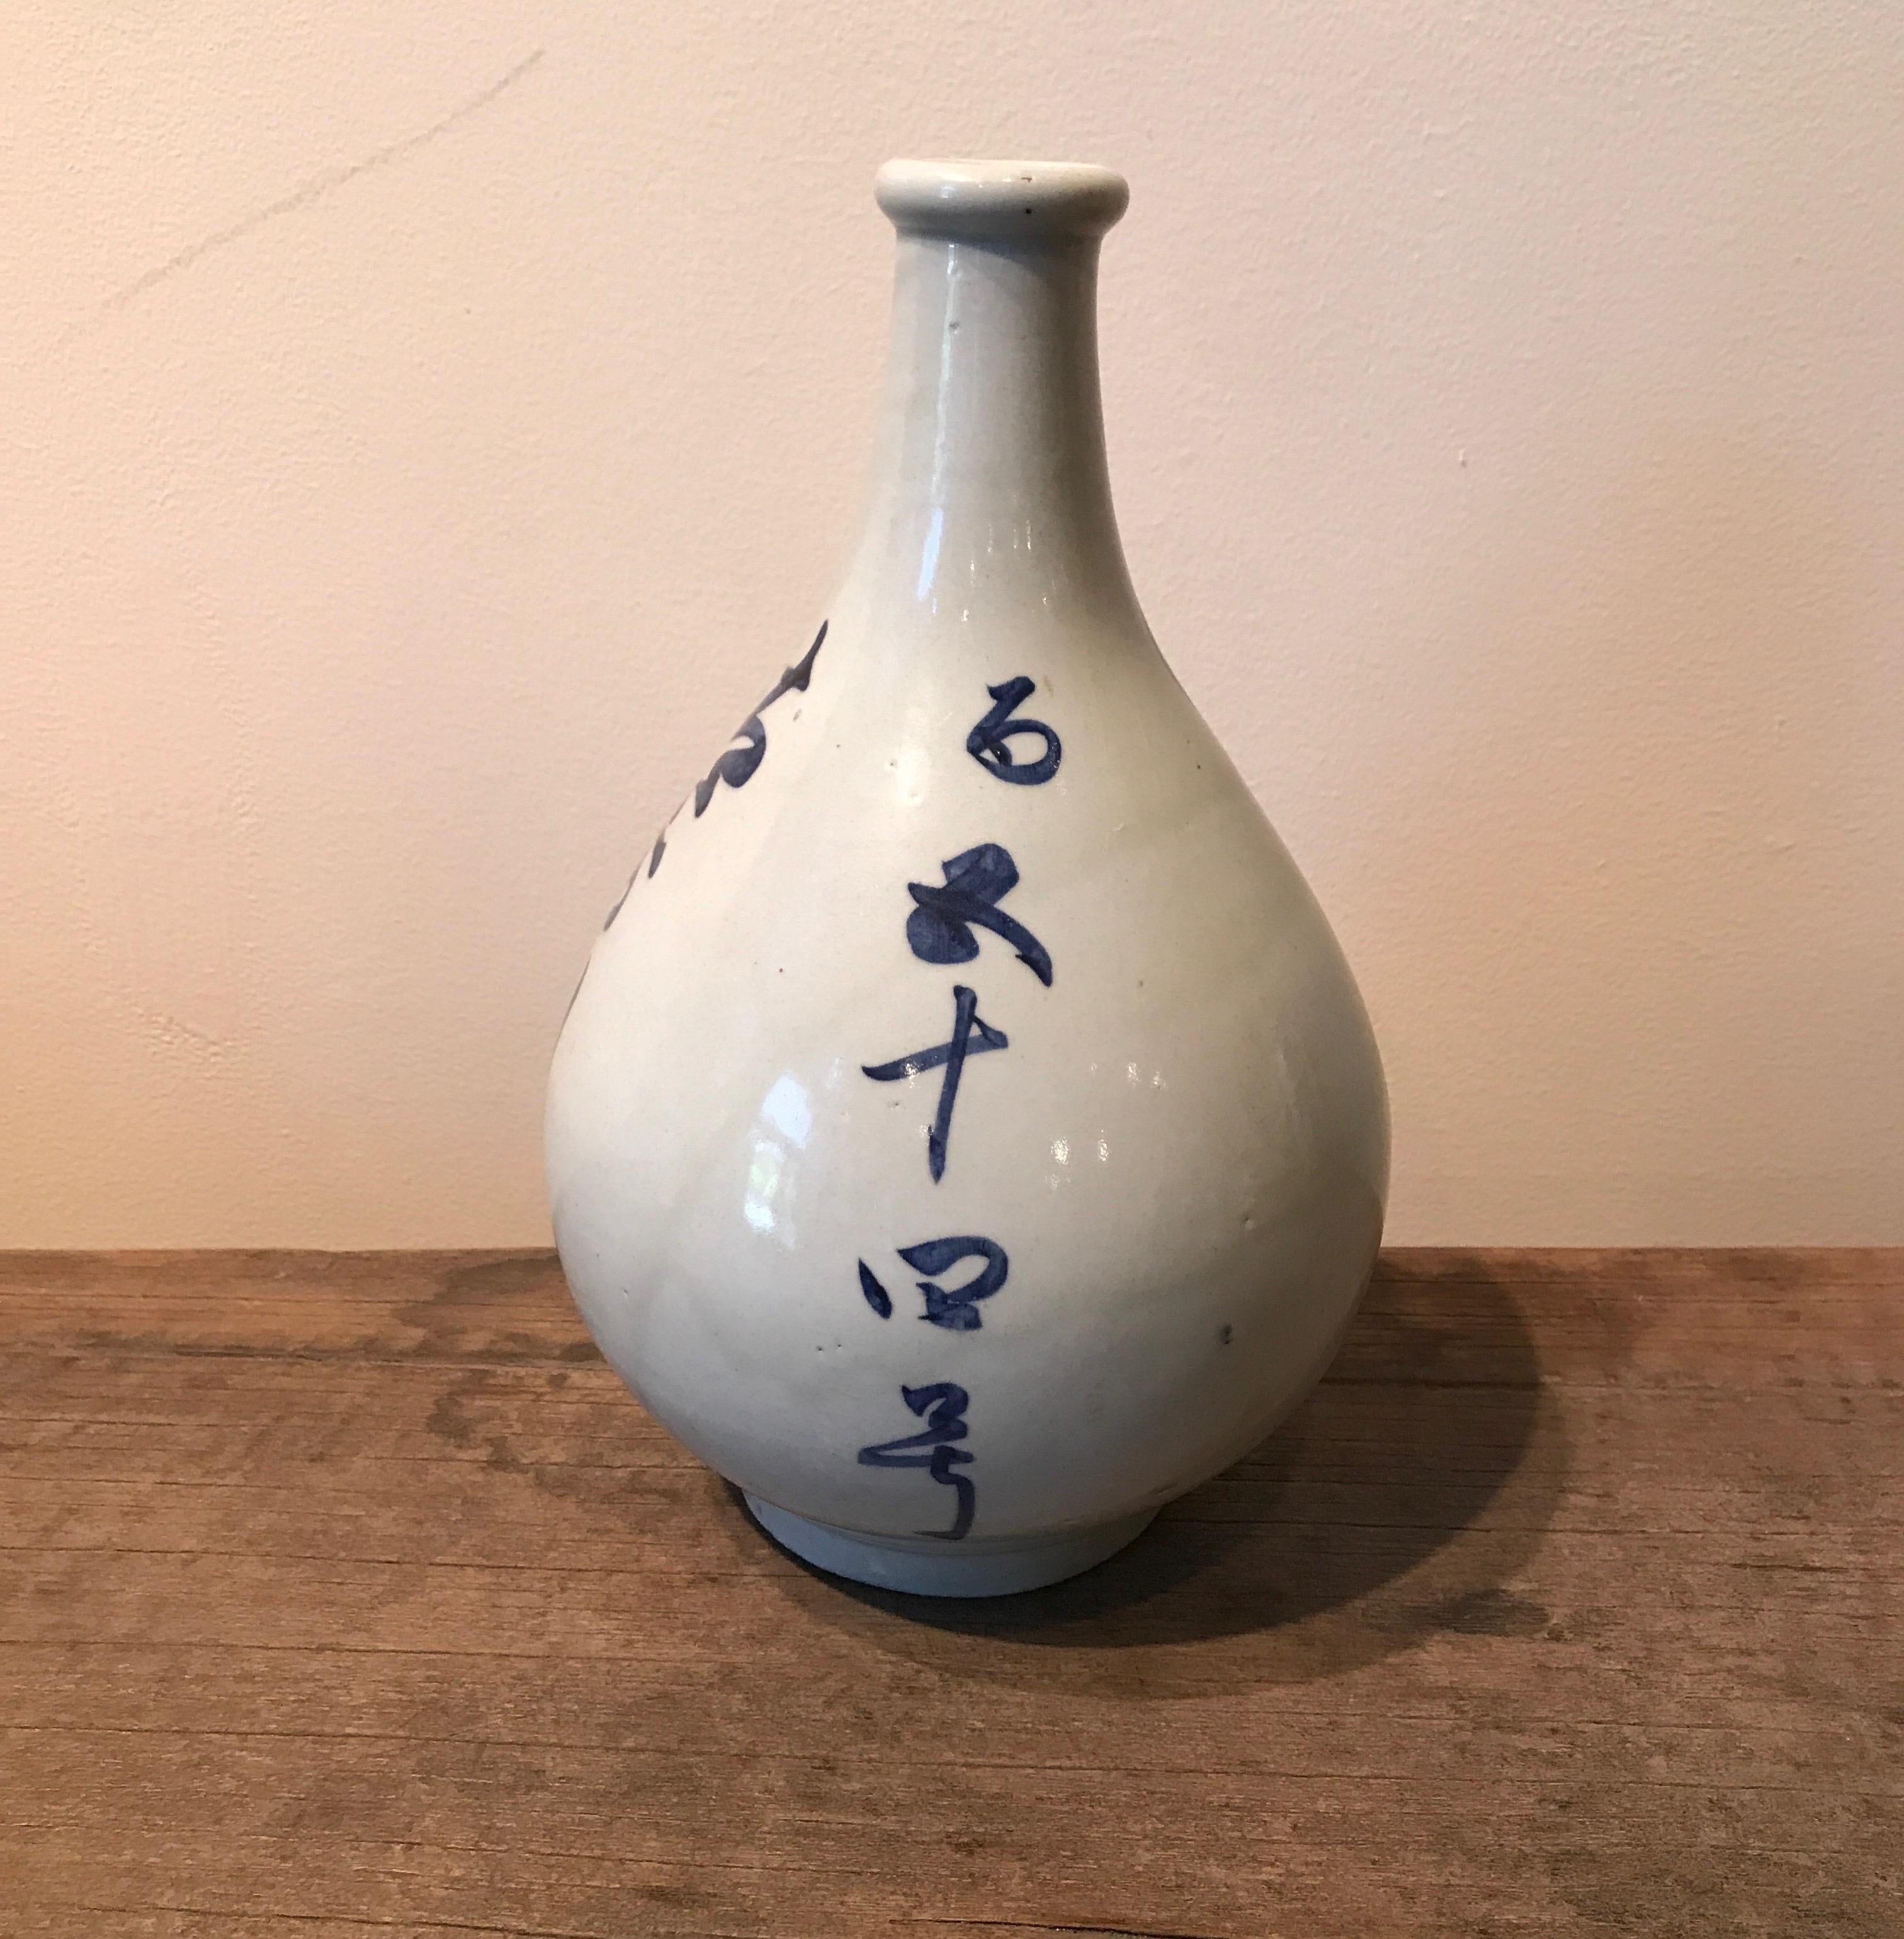 A gracefully shaped vintage Japanese sake bottle with striking and beautiful calligraphy all around, mid-20th century.
CR1005.